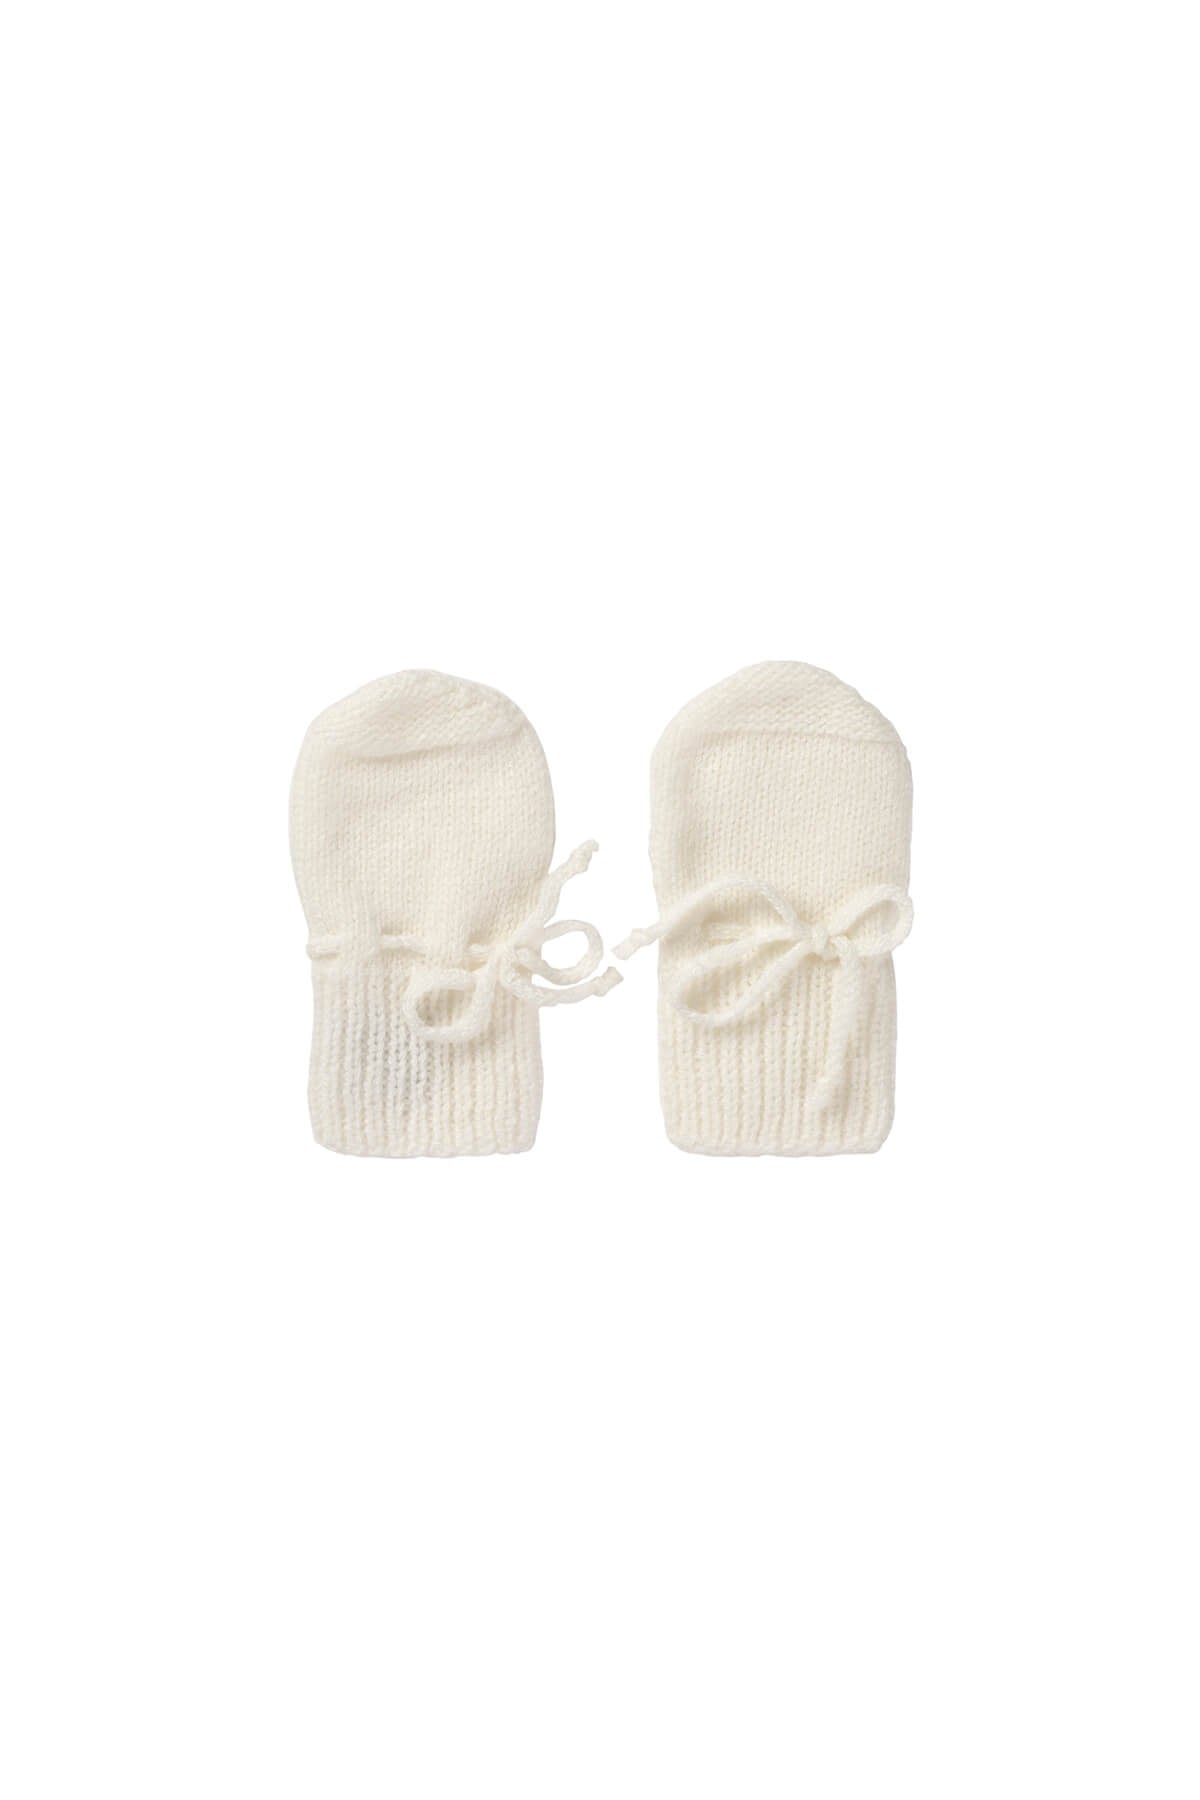 Johnstons of Elgin’s Baby's 1st Cashmere Accessories Gift Set with White Cashmere Baby Mittens on a white background AW21GIFTSET20A